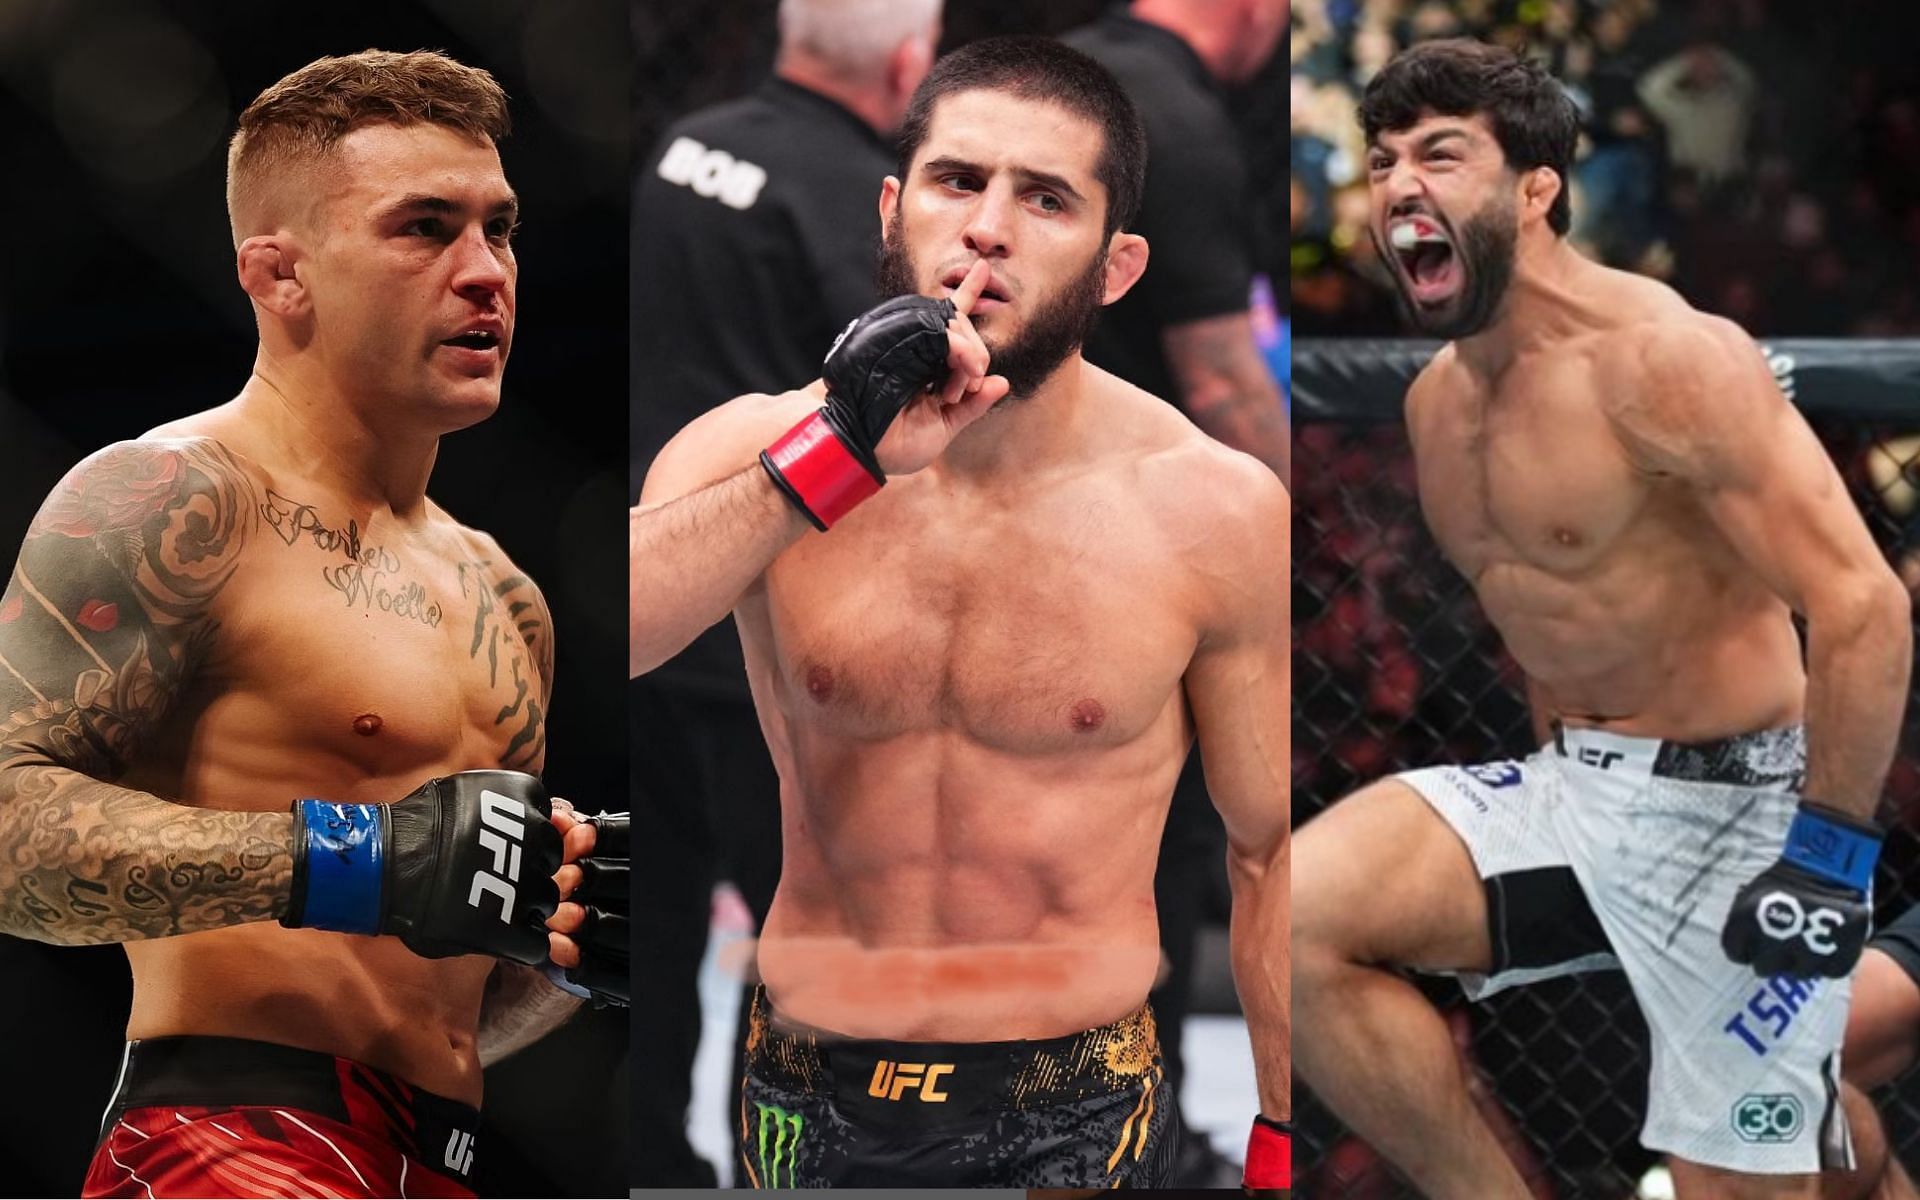 Islam Makhachev (middle) accused of avoiding tough matchups by Arman Tsarukyan (right) after calling out Dustin Poirier (left) [Images Courtesy: @GettyImages, @arm_011 and @islam_makahchev on Instagram]